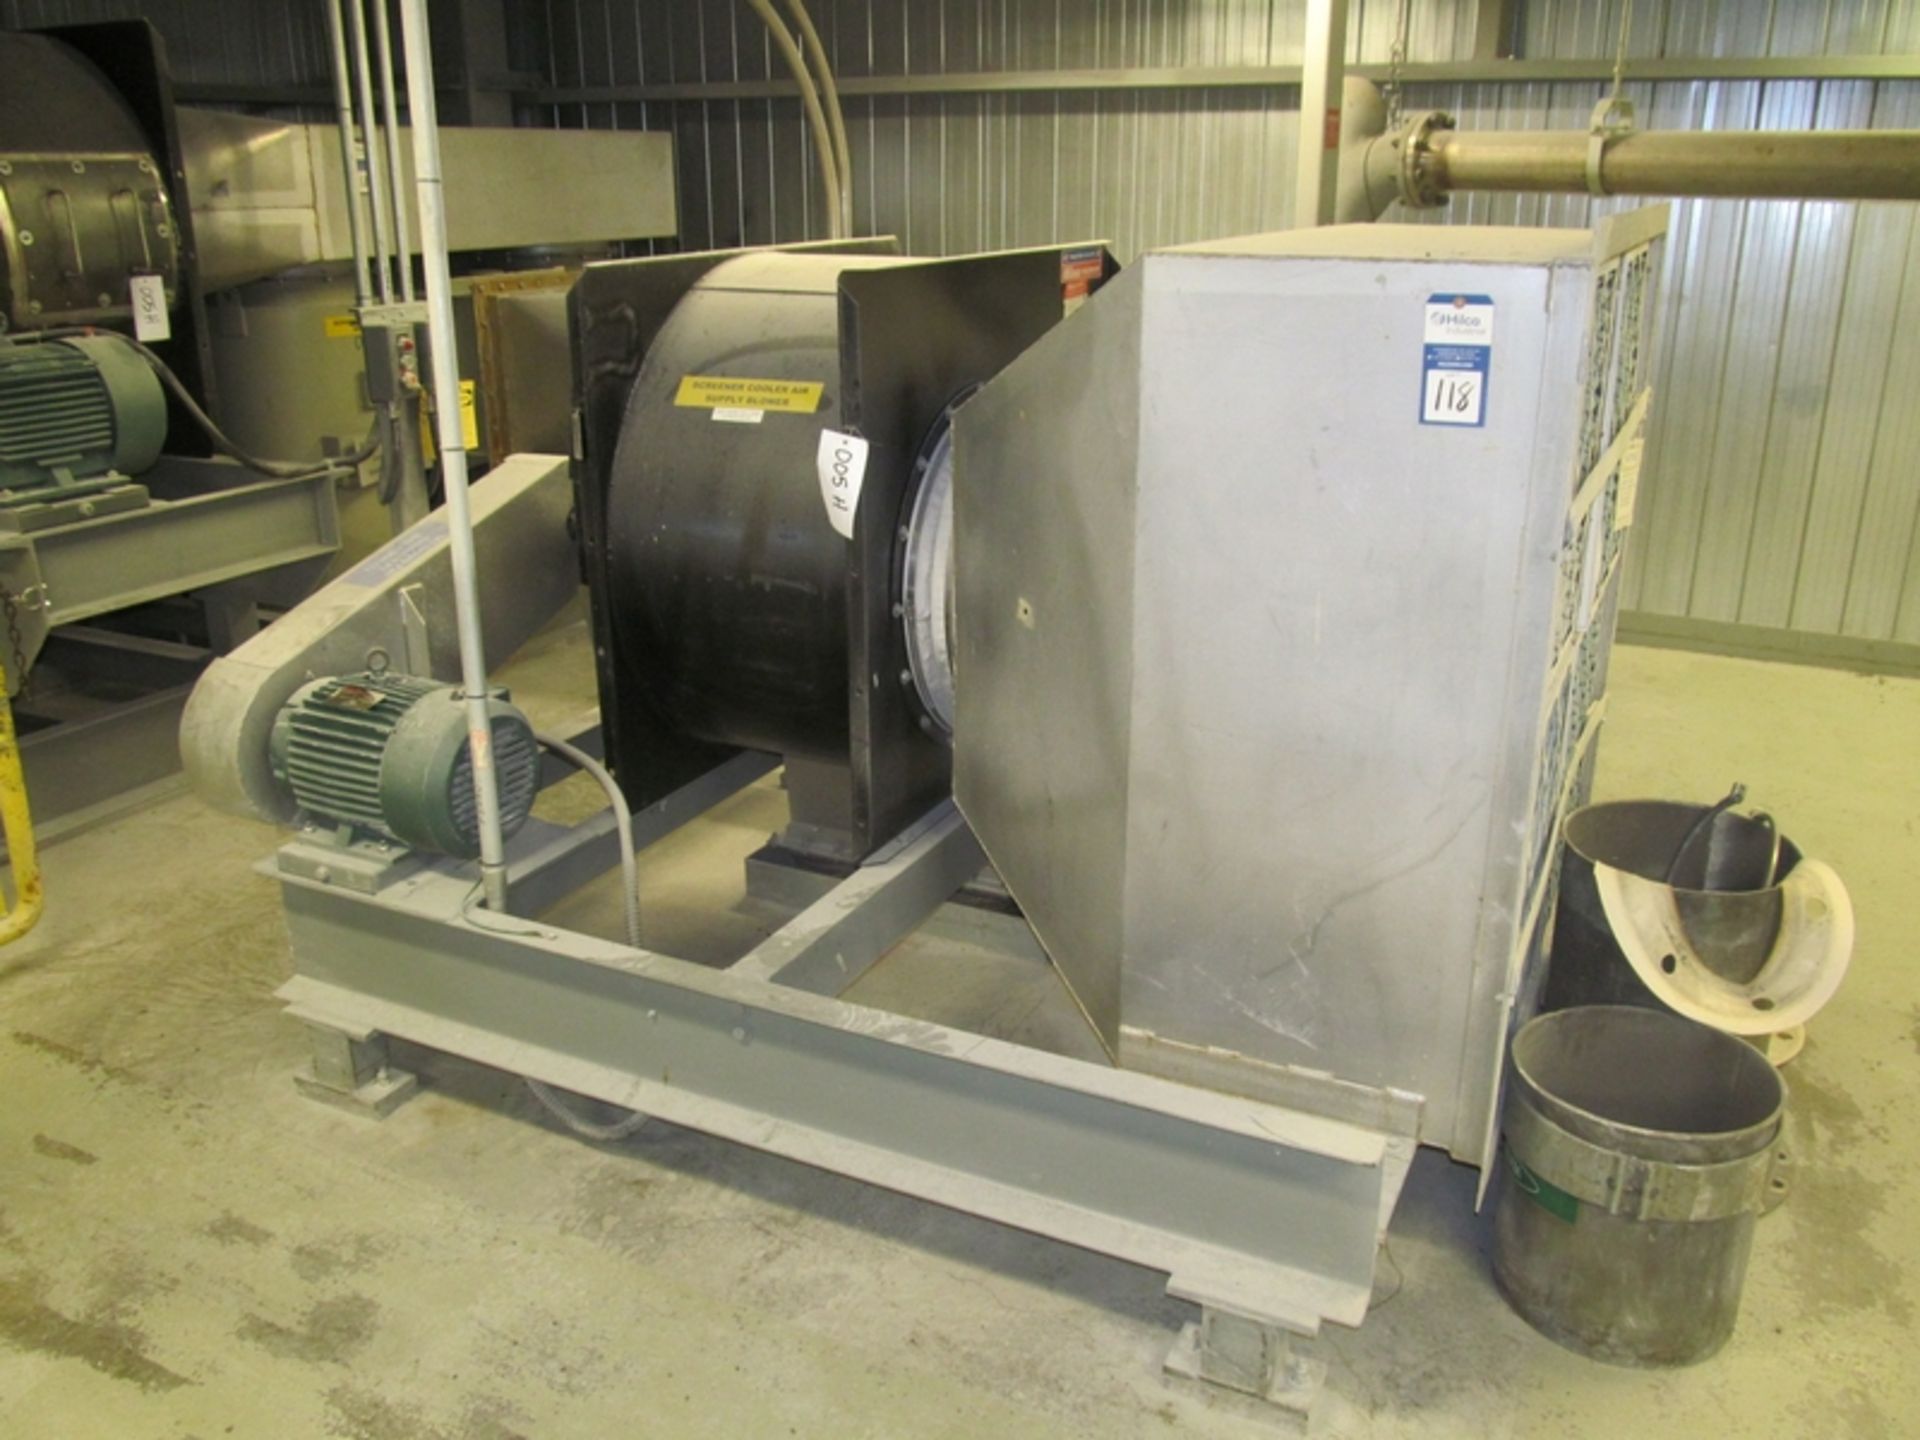 Witte Stainless Steel Vibratory Pellet Cooler Screener; Serial Number: 5447; Approximate 36" wide - Image 2 of 3